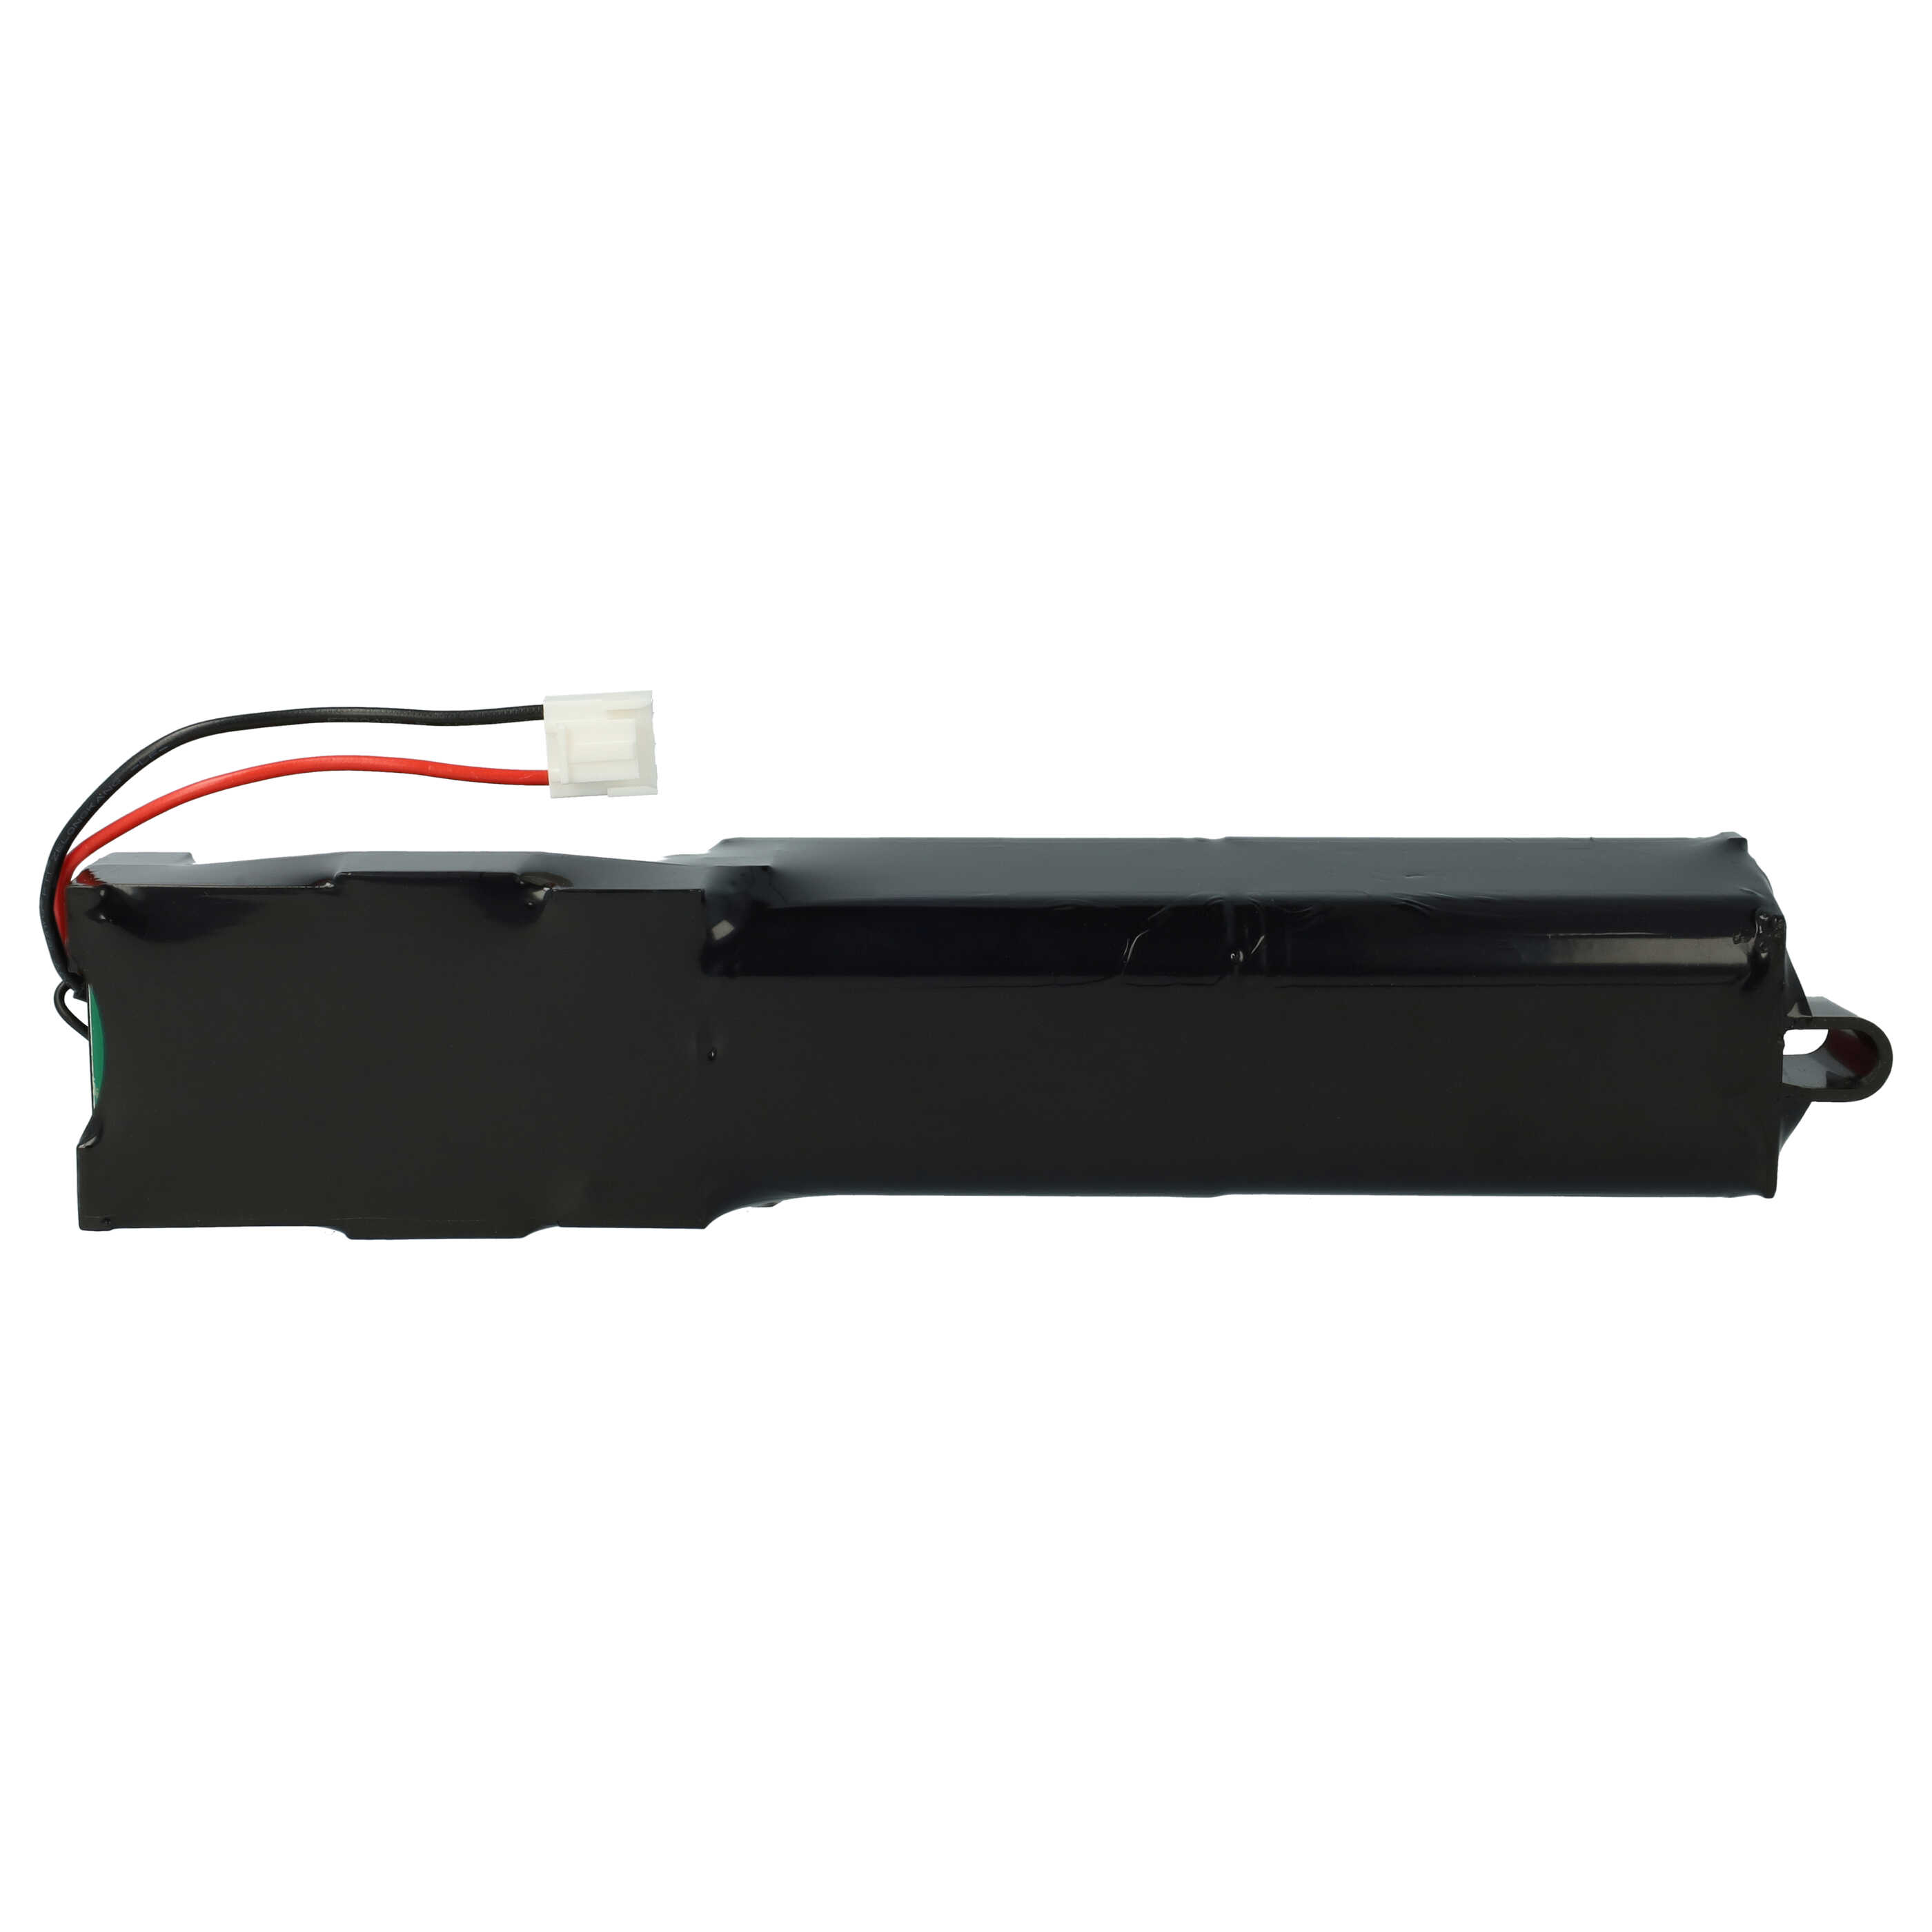 Battery Replacement for Rowenta YU10562-16003, RS-RH5651 for - 2500mAh, 32.4V, Li-Ion